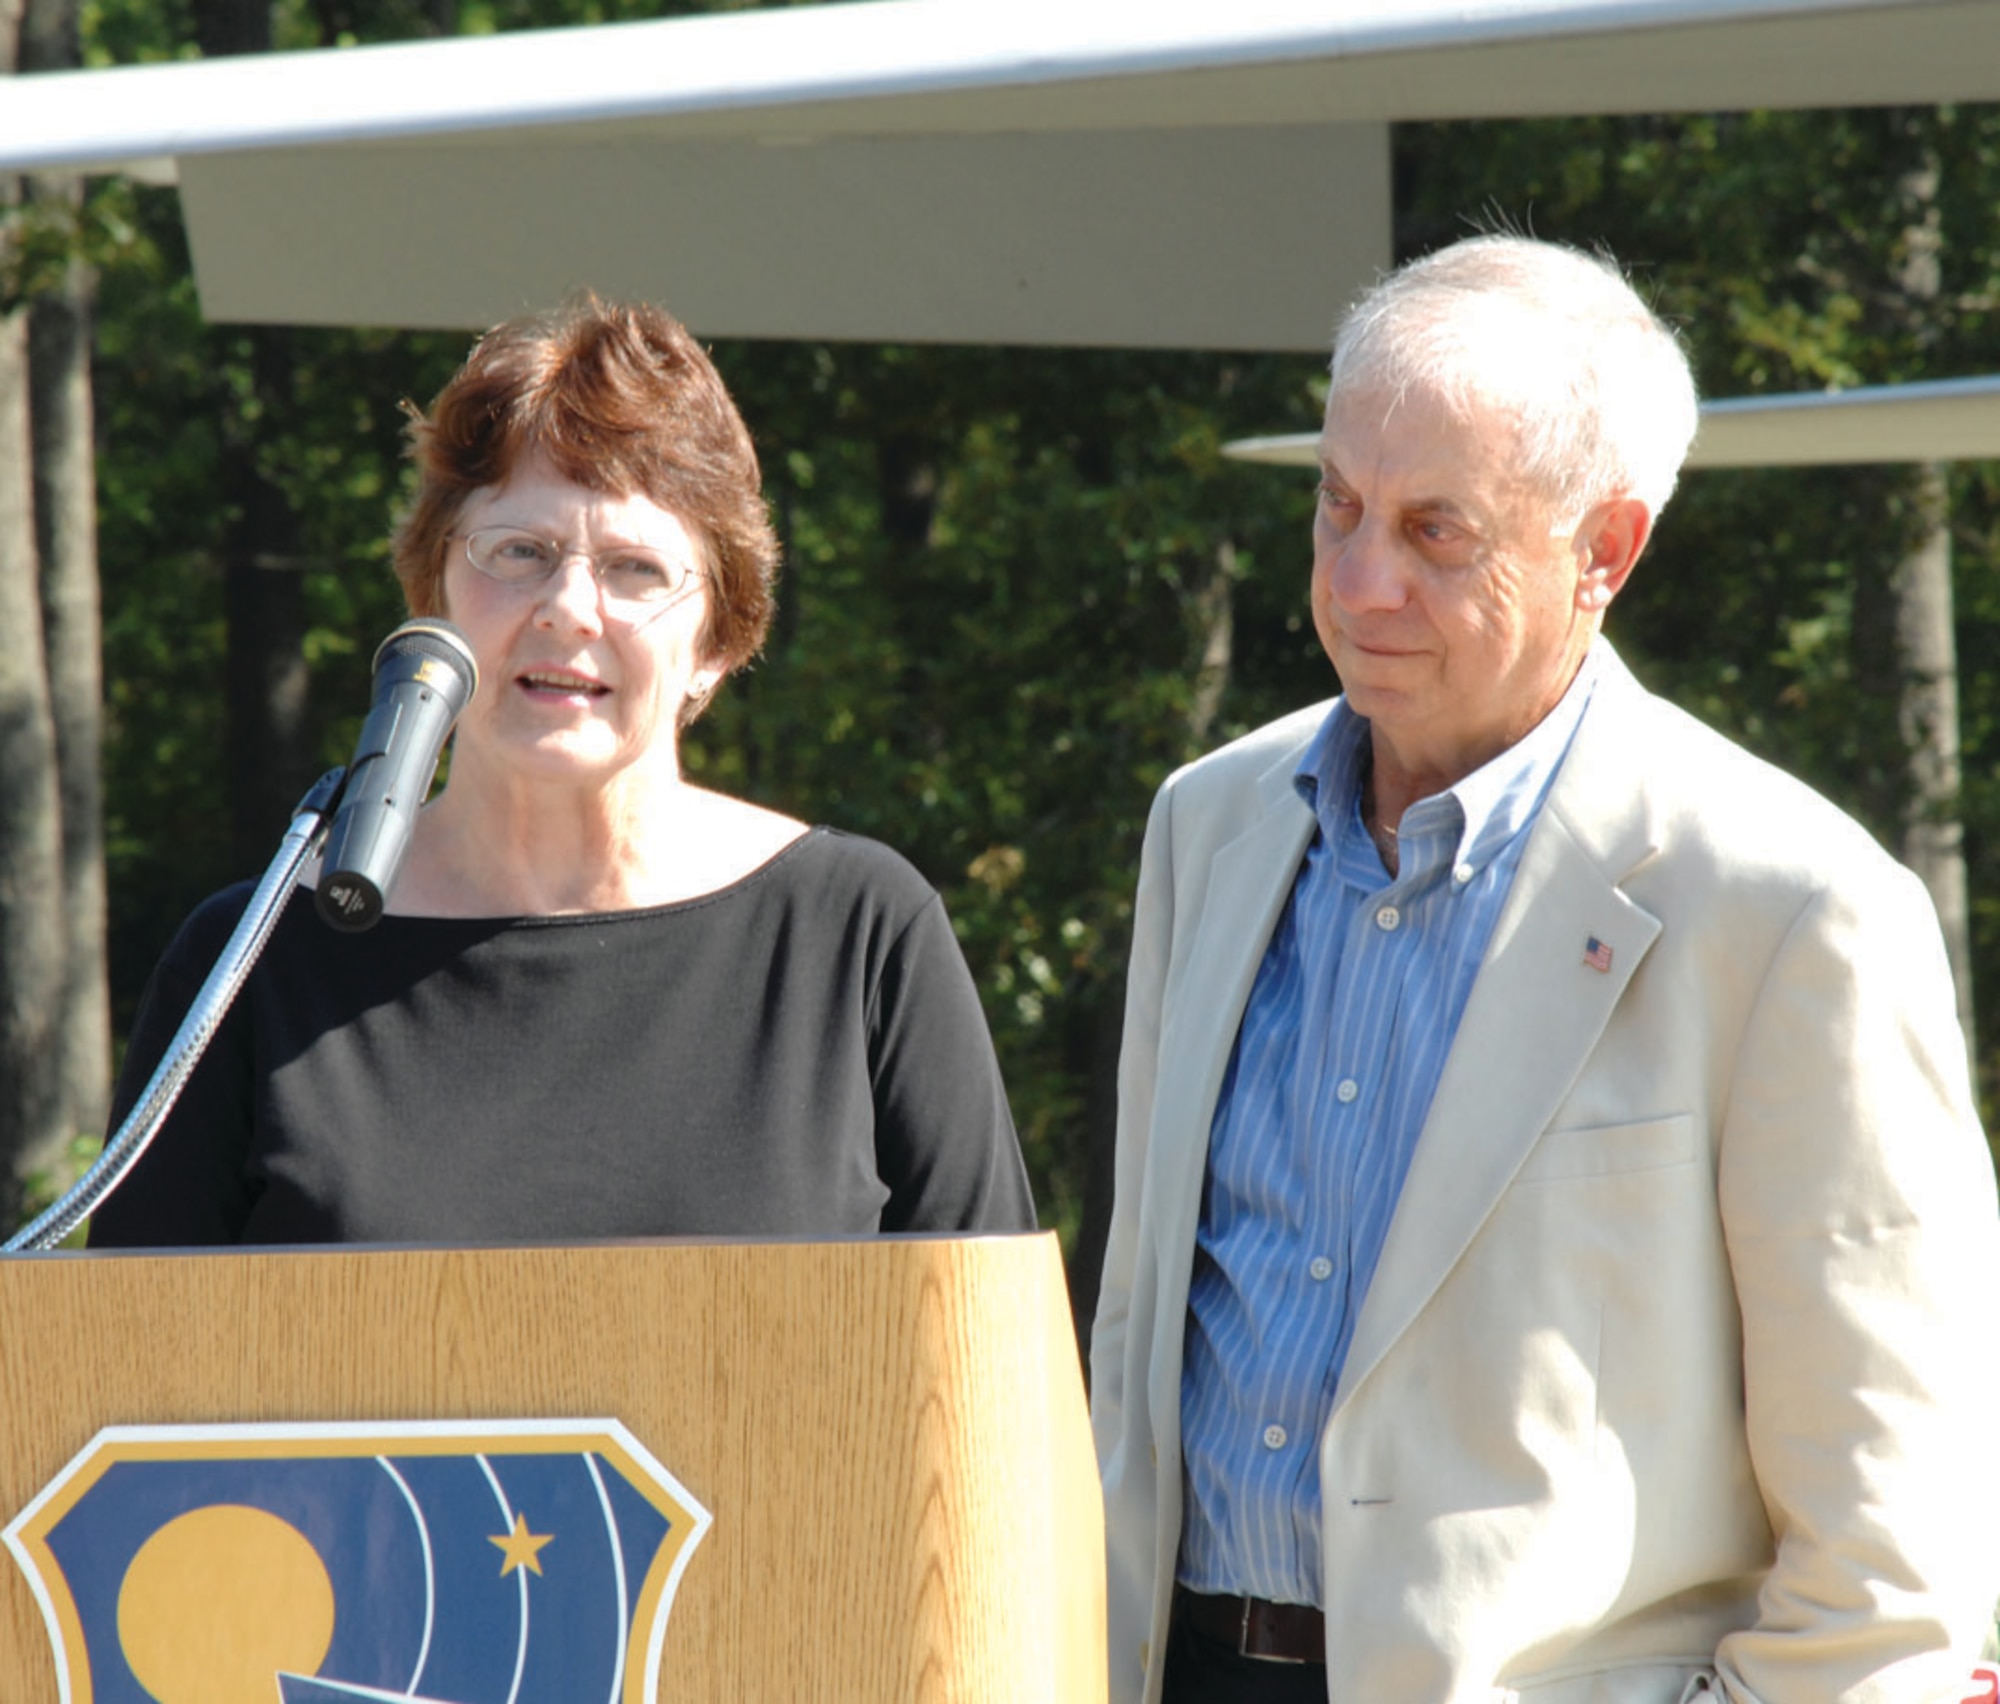 Irene and Art Duricy, parents of Maj. Jim Duricy, speak during the August 2007 ceremony to dedicate the F-15 Eagle static display at Arnold Air Force Base, Tenn., in memory of their son. Maj. Duricy died April 30, 2002, when he was forced to eject at a high speed as the F-15C he piloted crashed into the Gulf of Mexico. His body was never found. A 12-year test pilot, Maj. Duricy was assigned to the 40th Flight Test Squadron based at Eglin Air Force Base, Fla., at the time of his death. He was on a captive flight development test of a new missile when the aircraft crashed. (U.S. Air Force photo by David Housch)